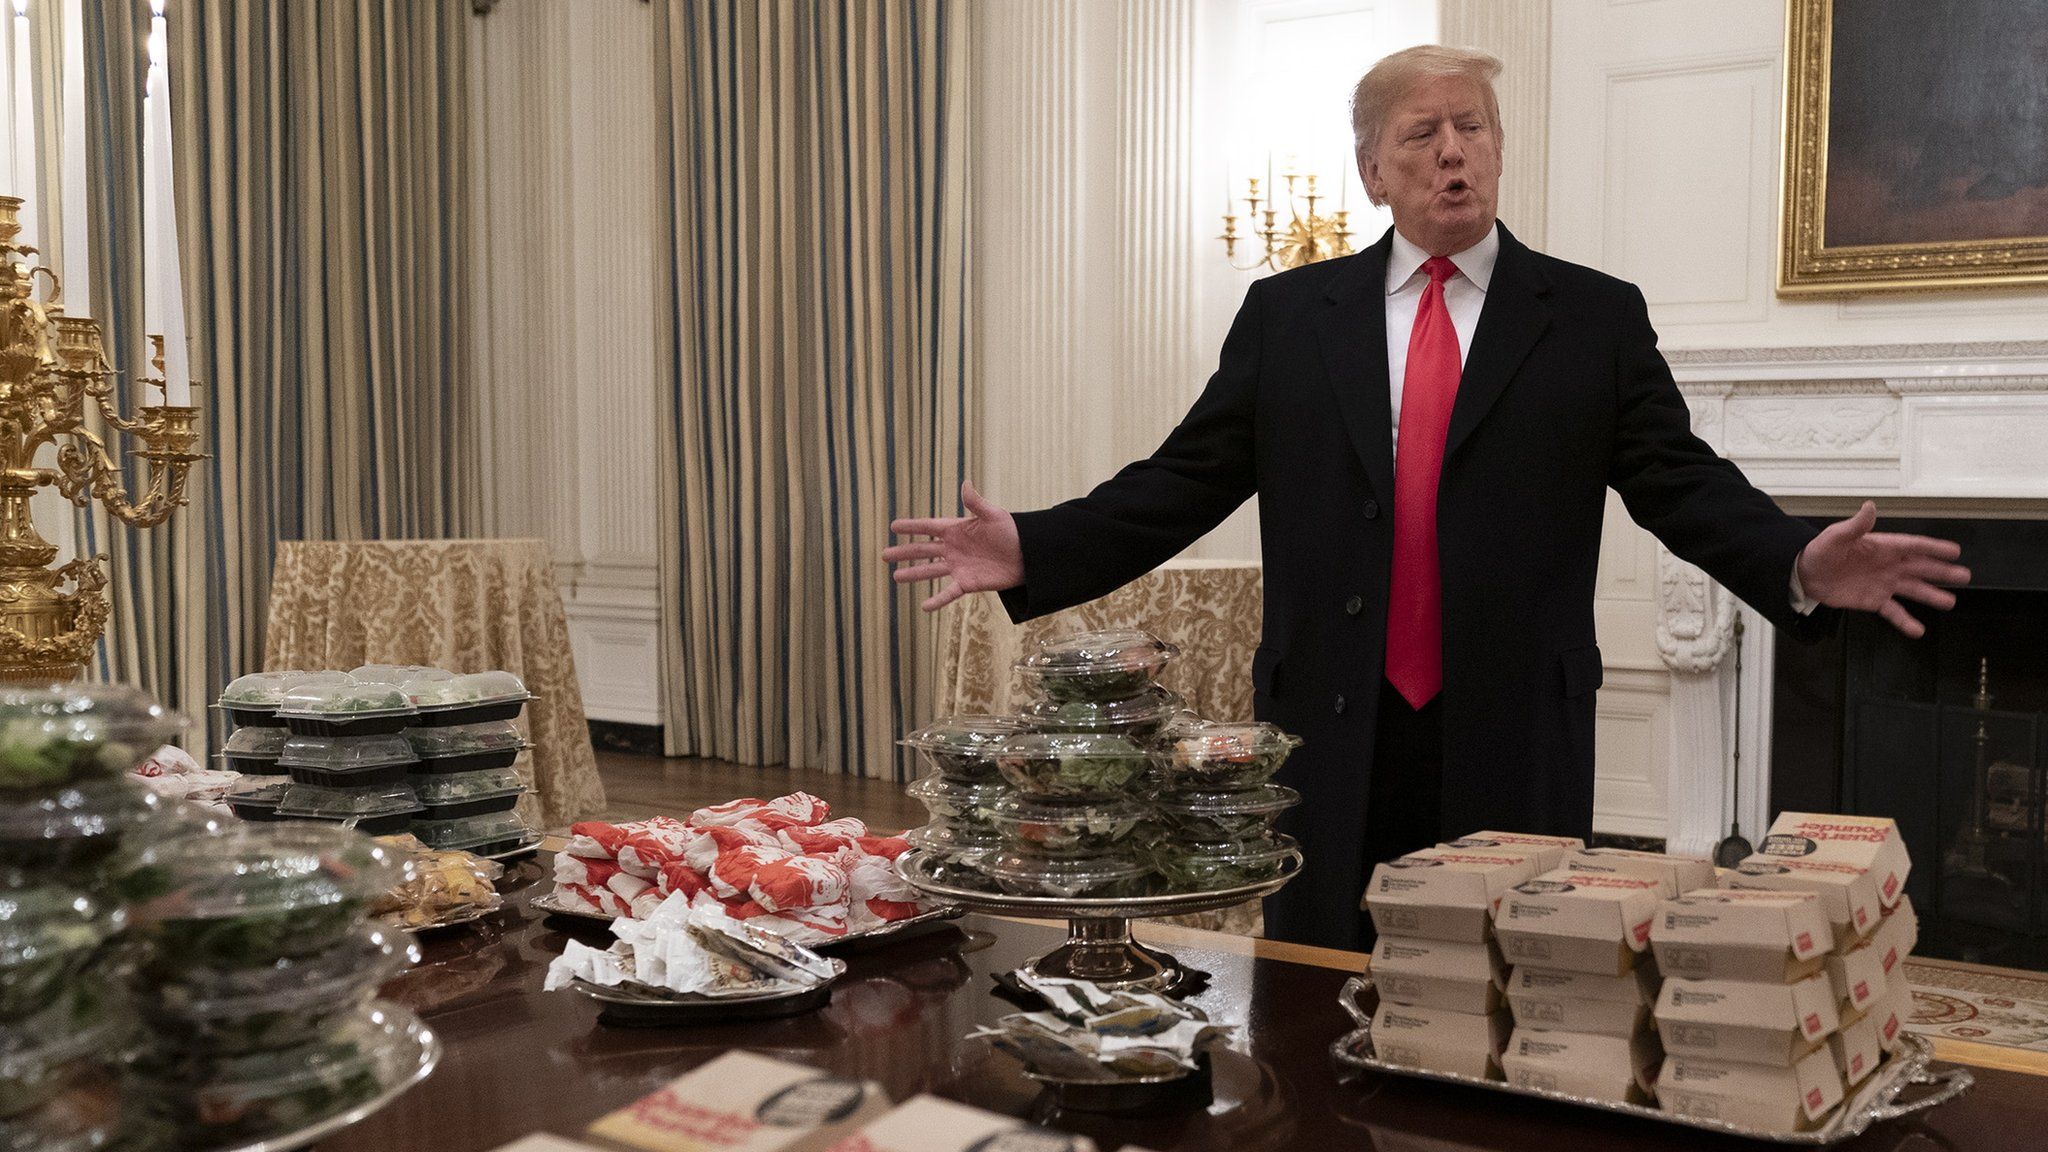 US President Donald Trump presents fast food to be served to the Clemson Tigers football team